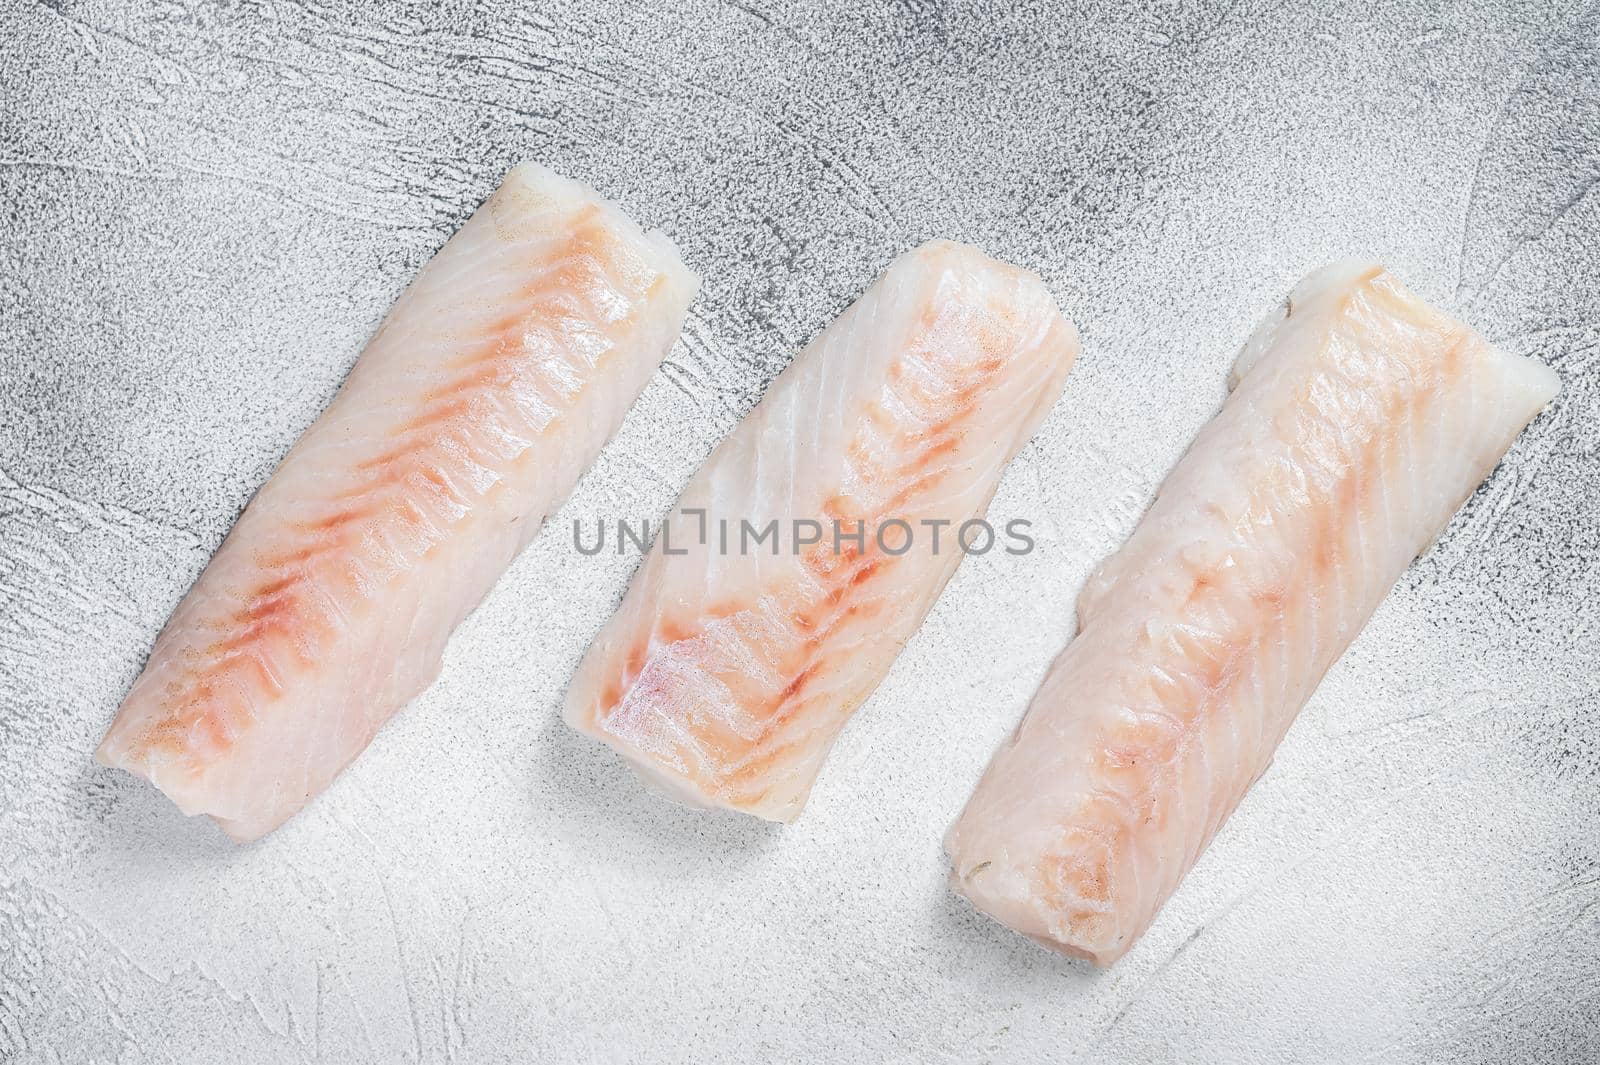 Raw Norwegian cod fish fillet on kitchen table. White background. Top view.